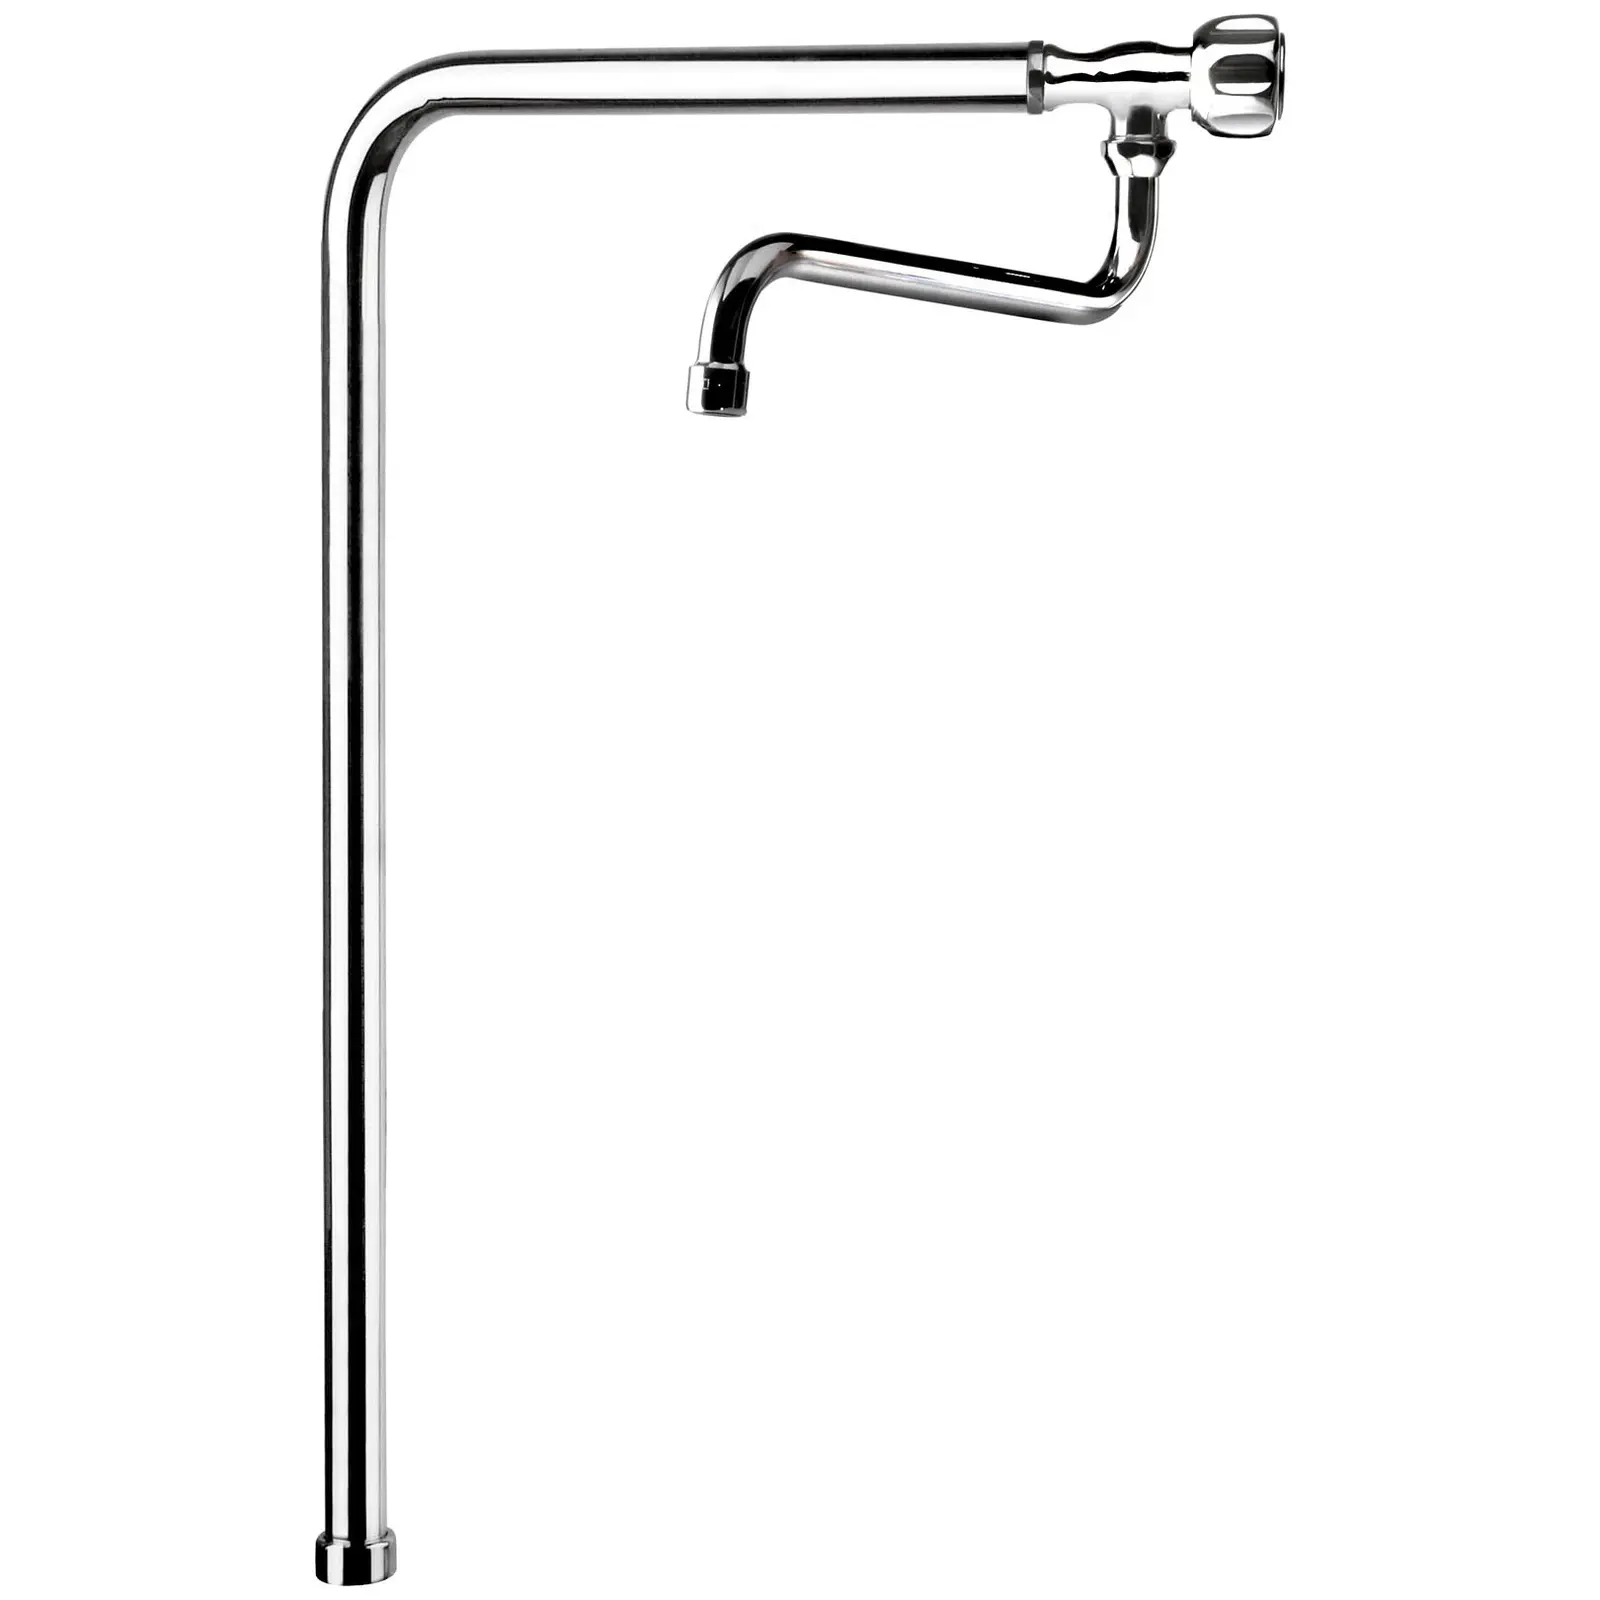 column spout - water tap 220 mm - height 650 mm - Chrome-plated brass